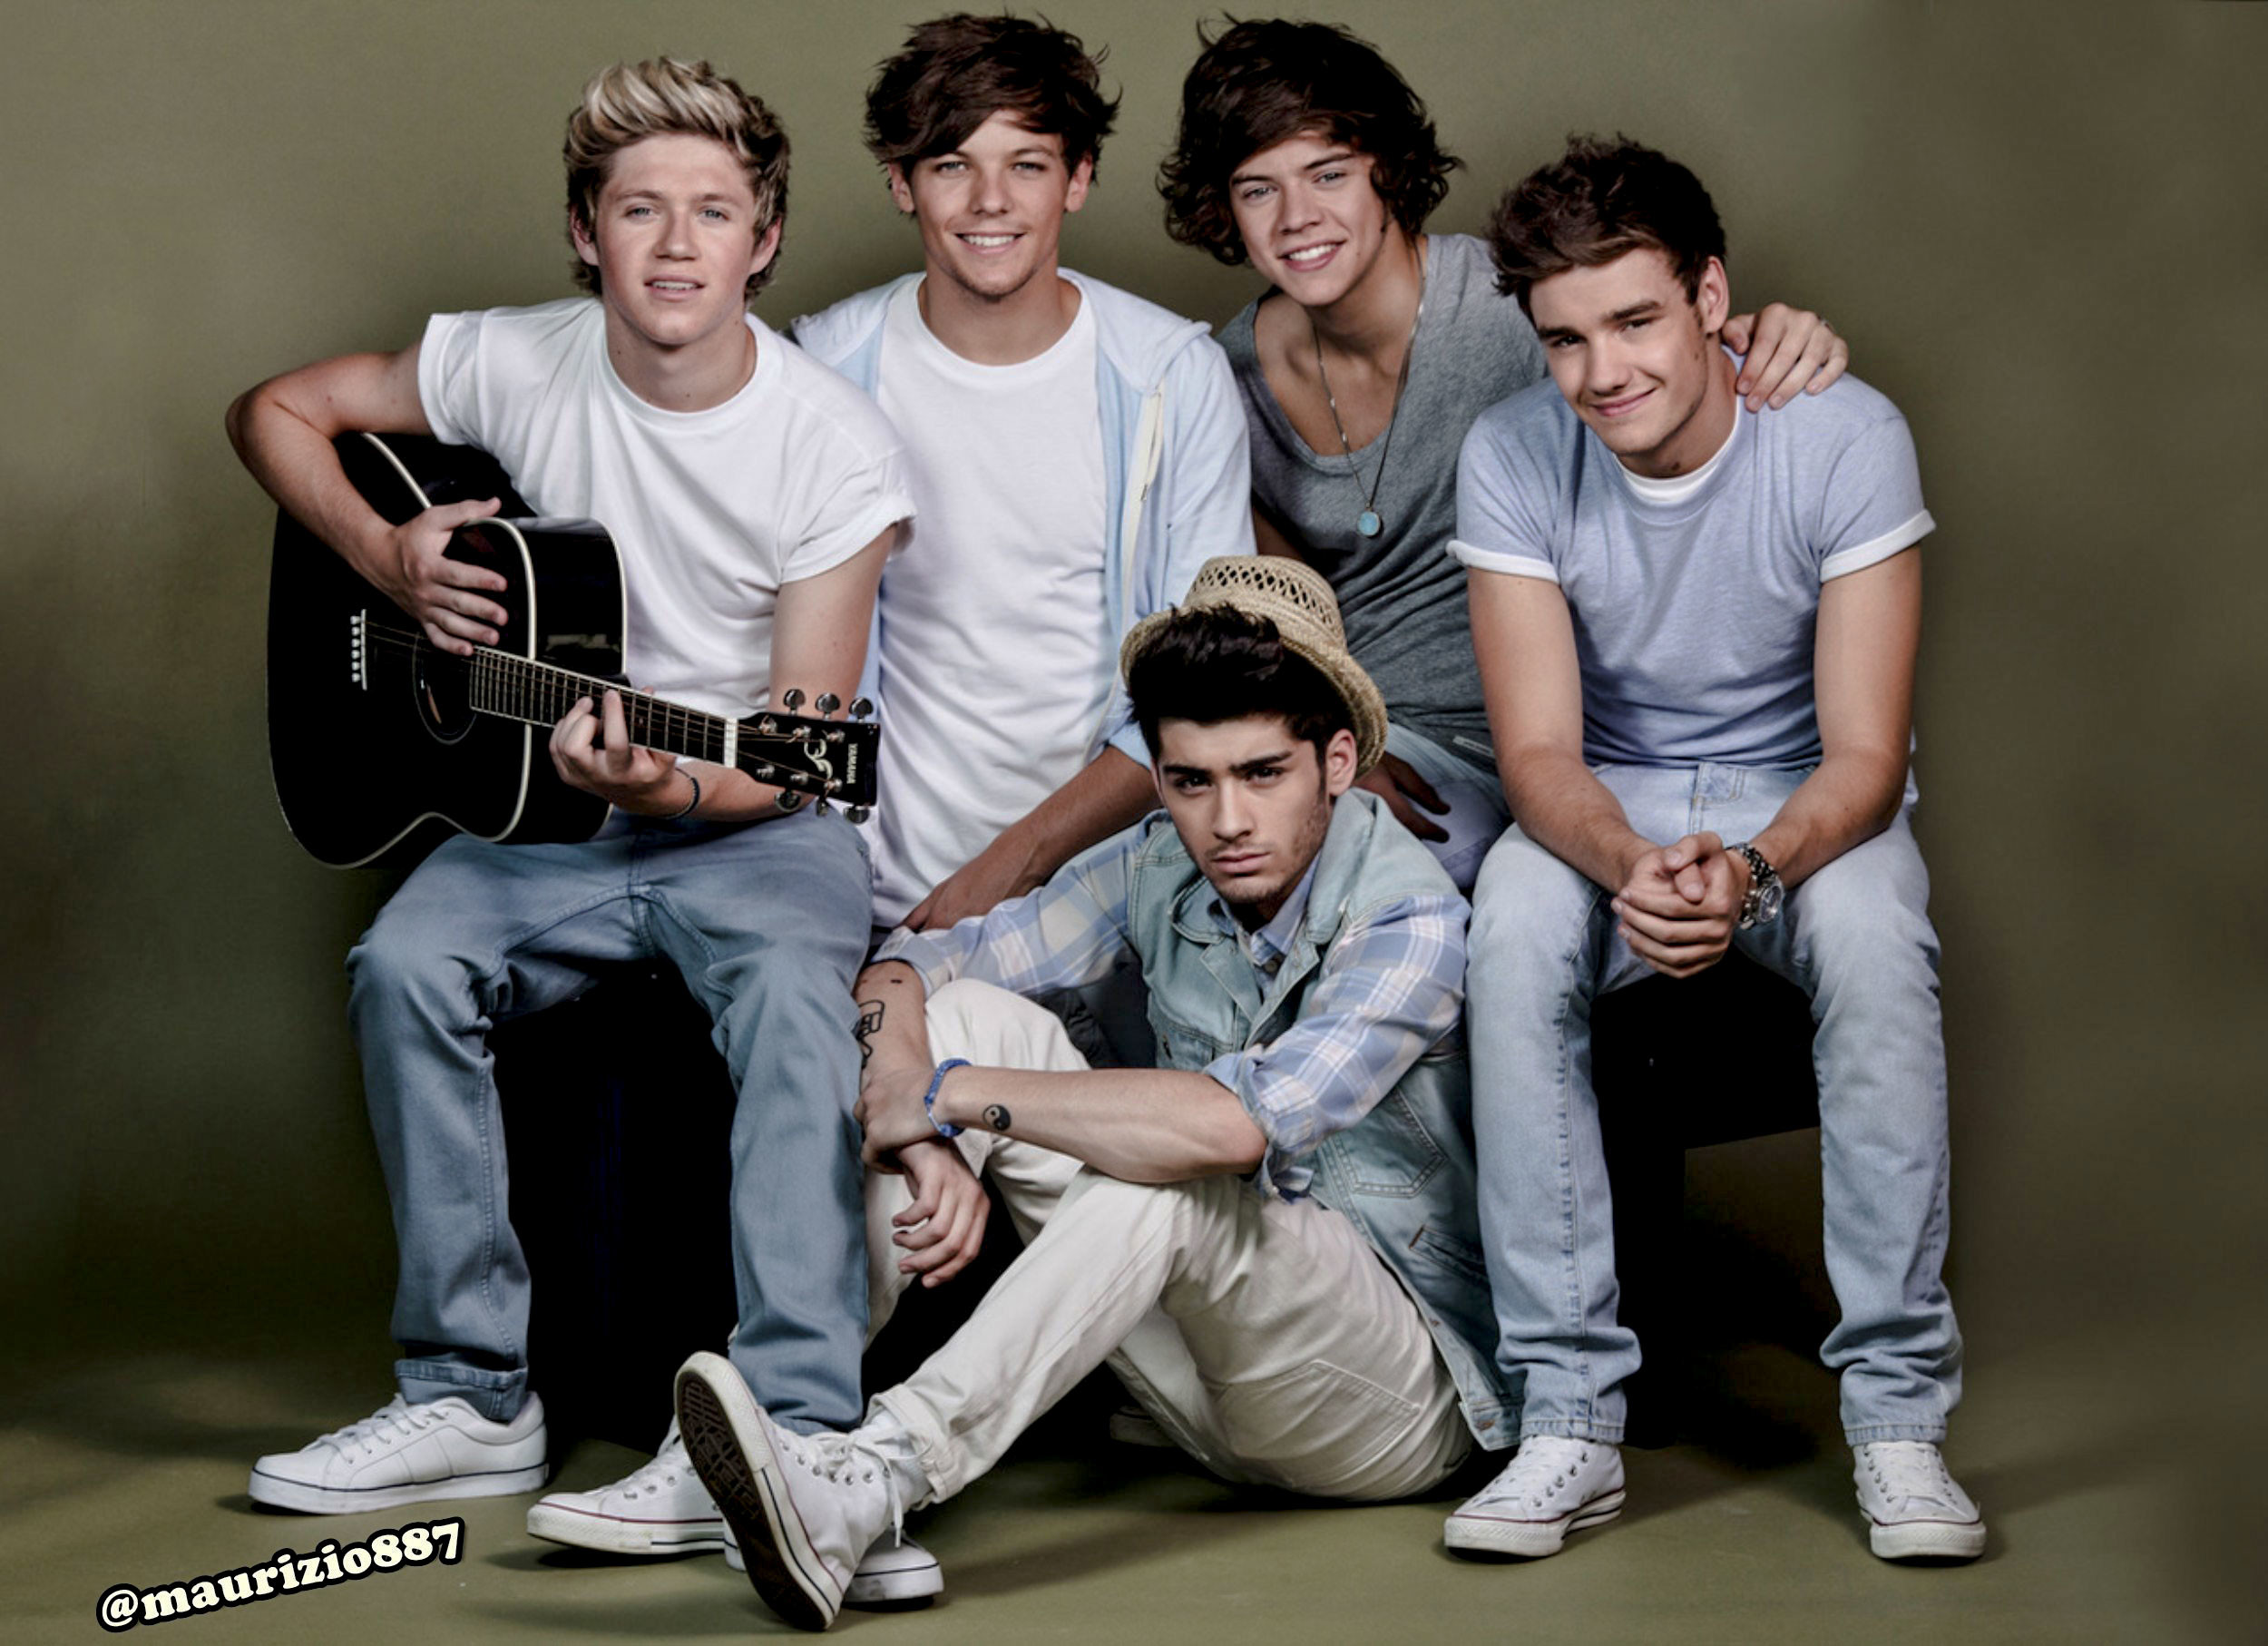 2500x1814 One Direction photoshoot.HD Wallpaper and background photos of One Direction  photoshoot. for fans of One Direction images.